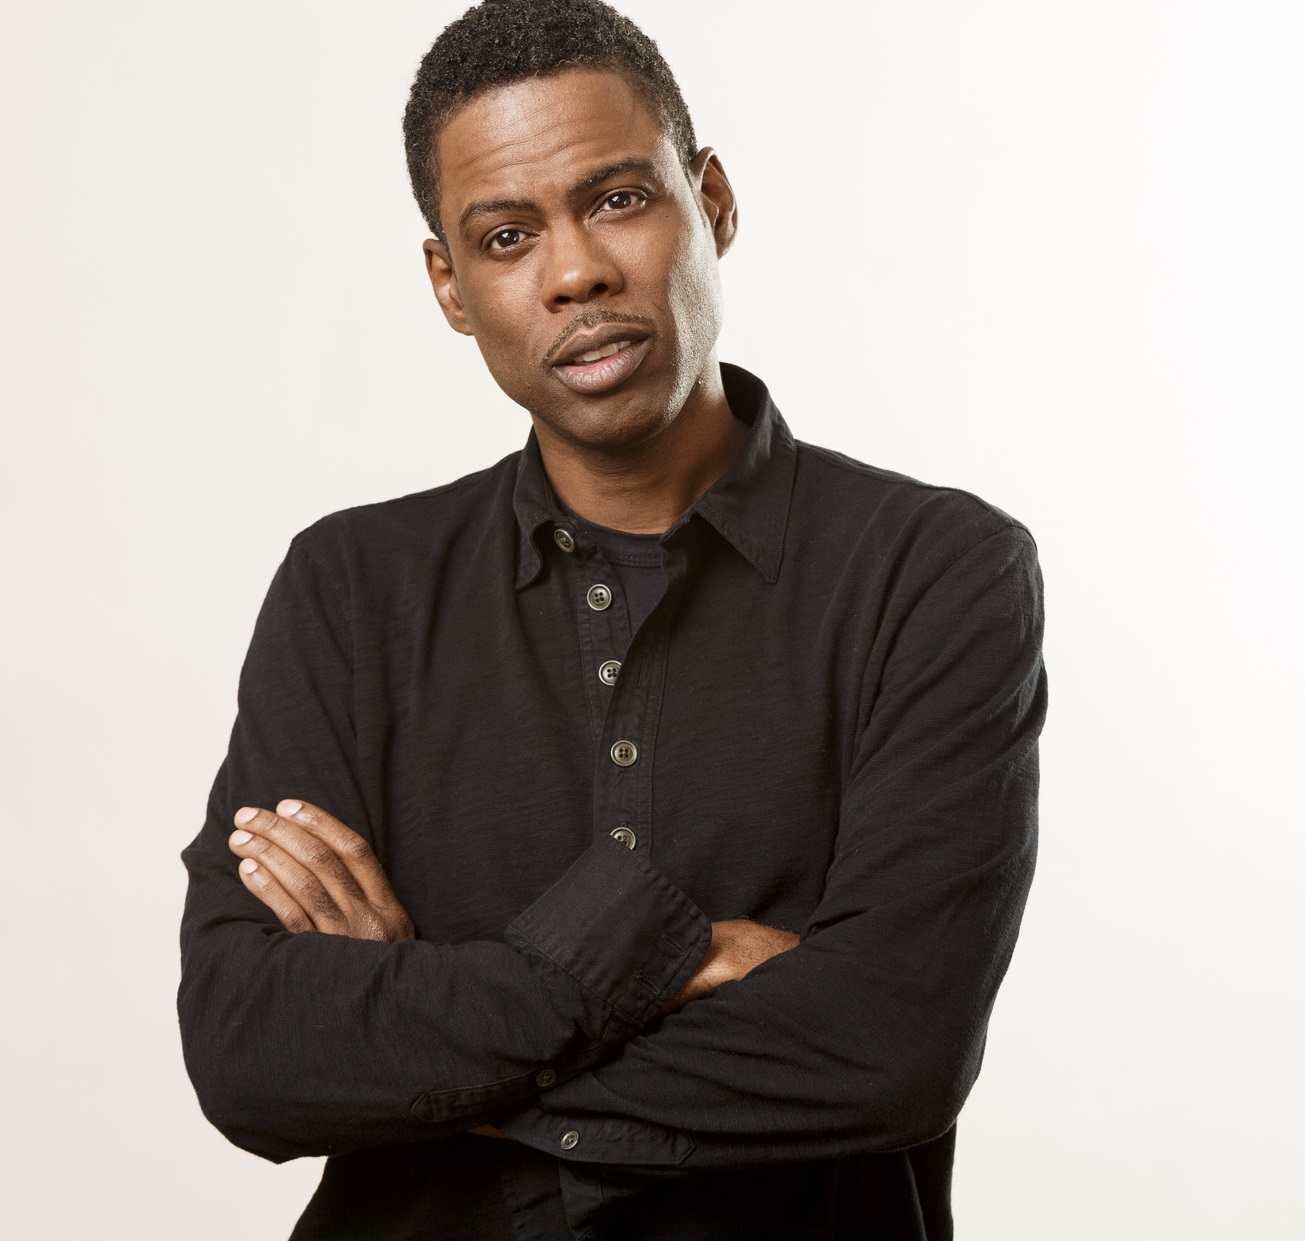 Chris Rock Family Pictures, Siblings, Wife, Kids, Age